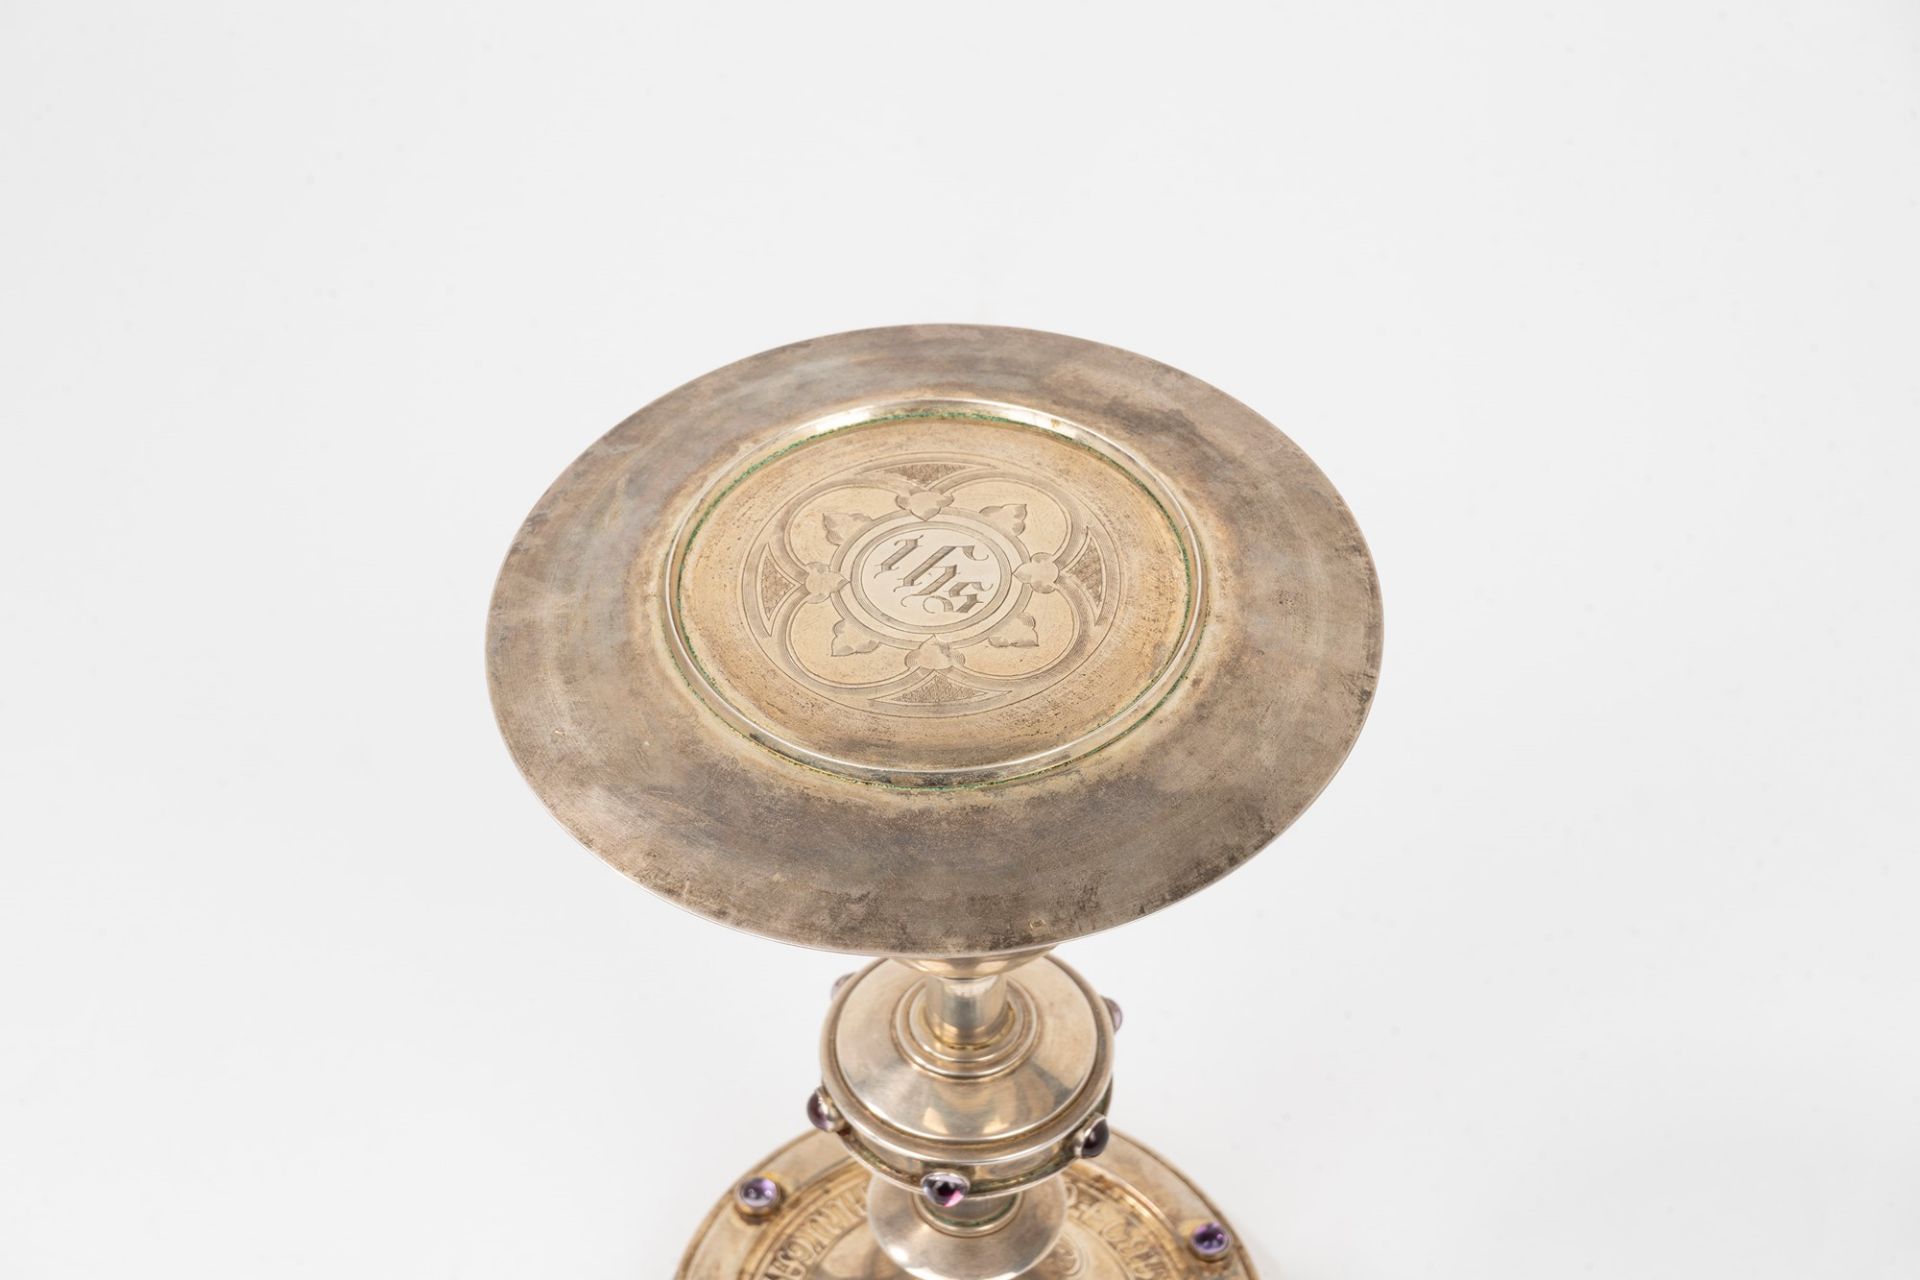 Large silver chalice with saucer, France, late 19th century - Image 3 of 7